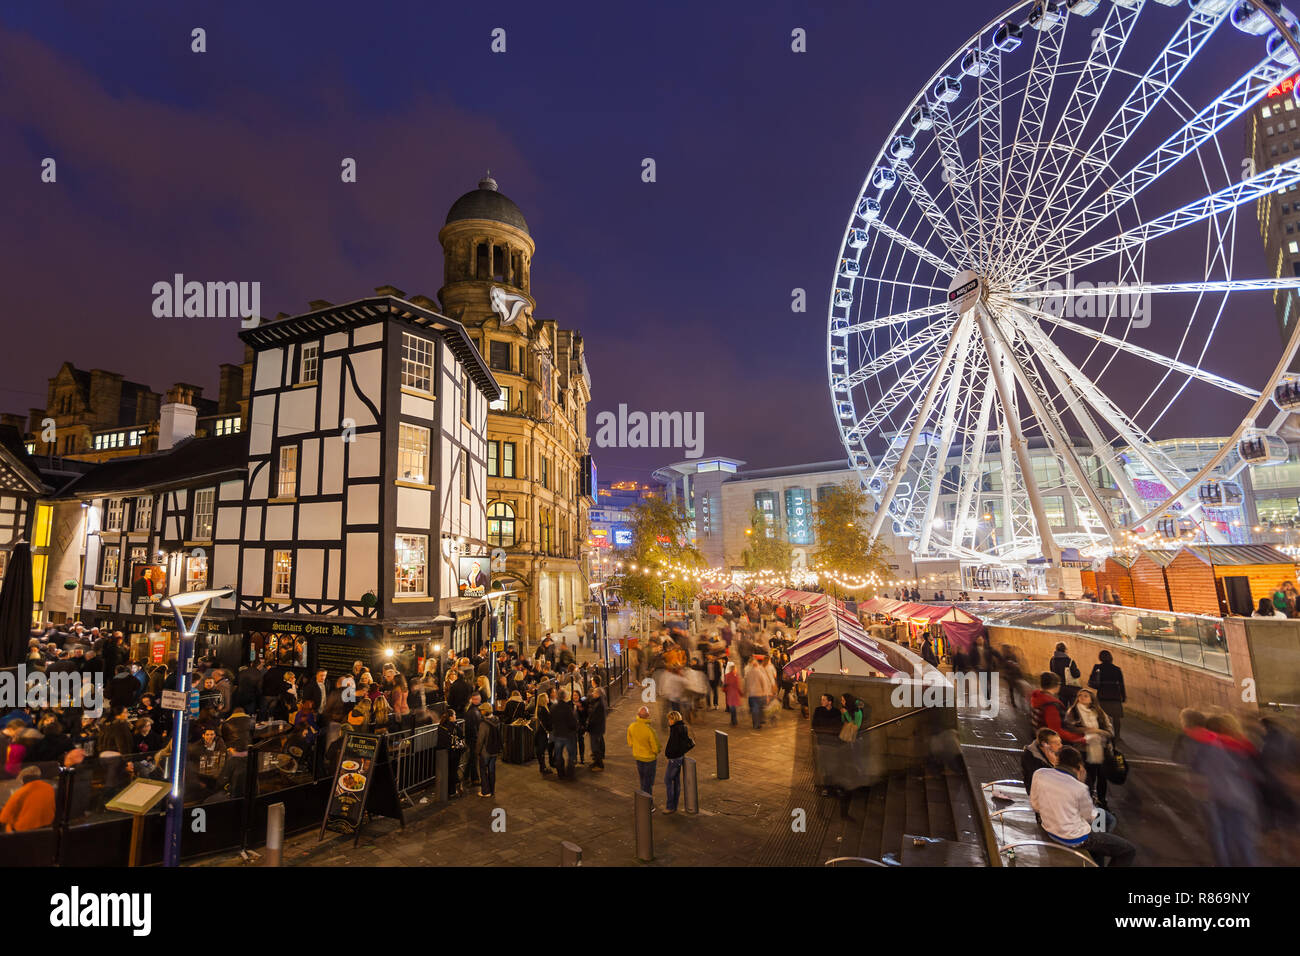 The Old Wellington Inn and Christmas market in Manchester UK Stock Photo